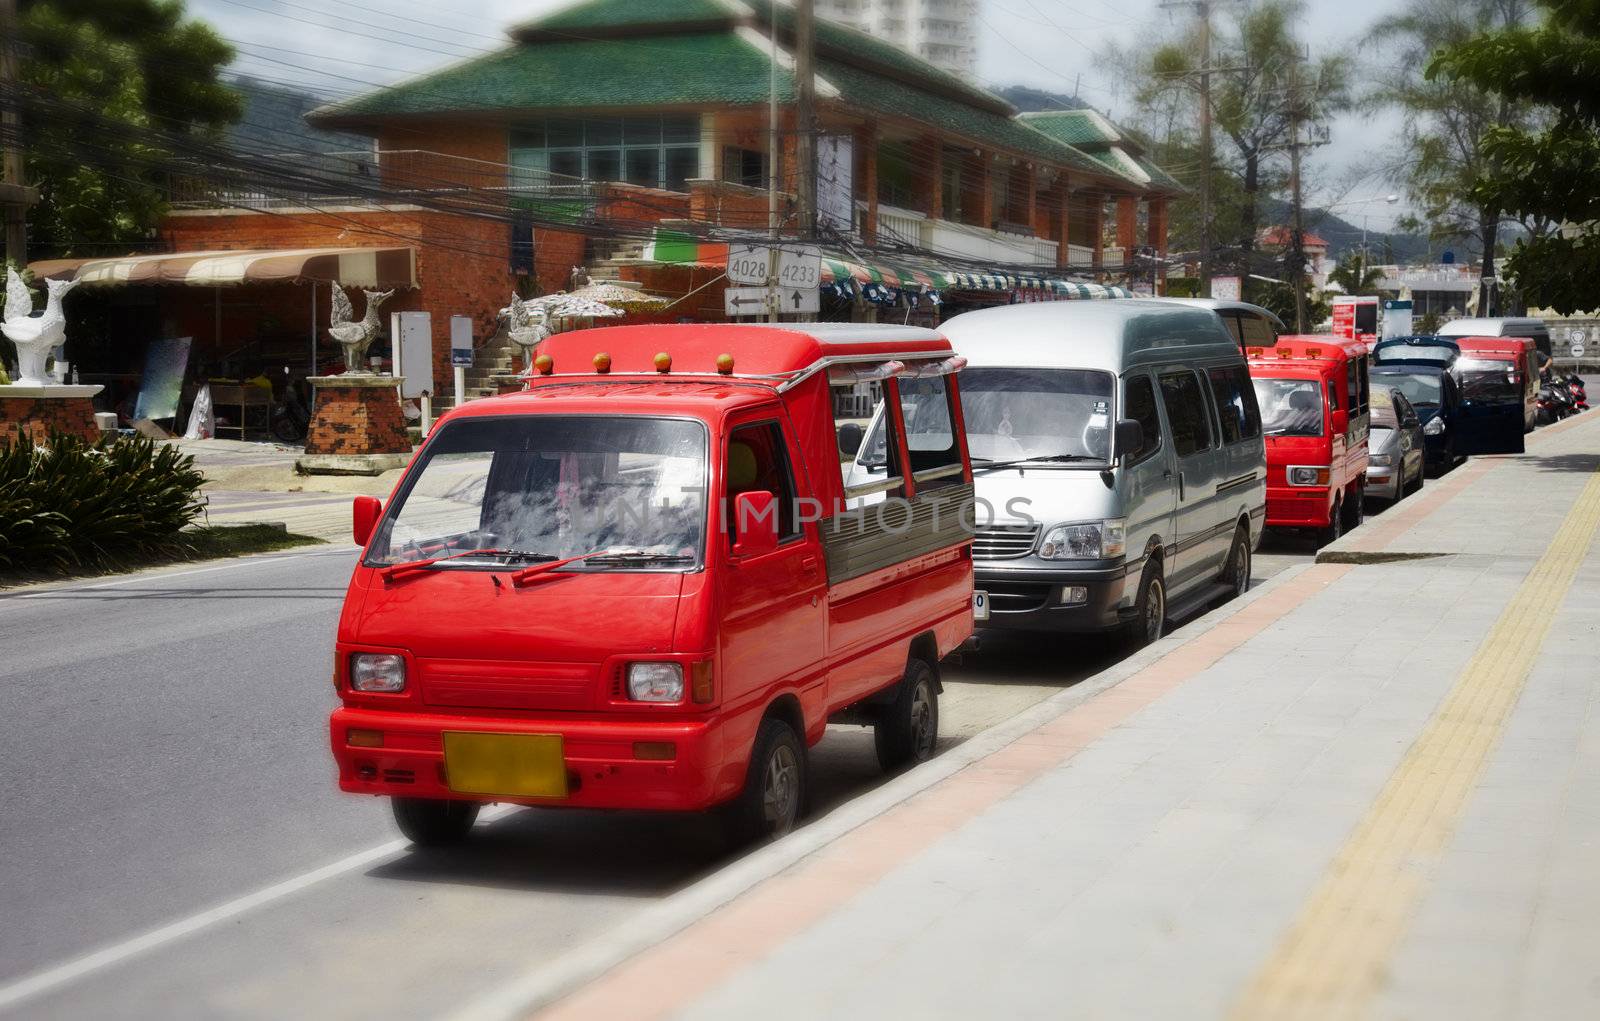 Small buses taxis in Thailand by pzaxe